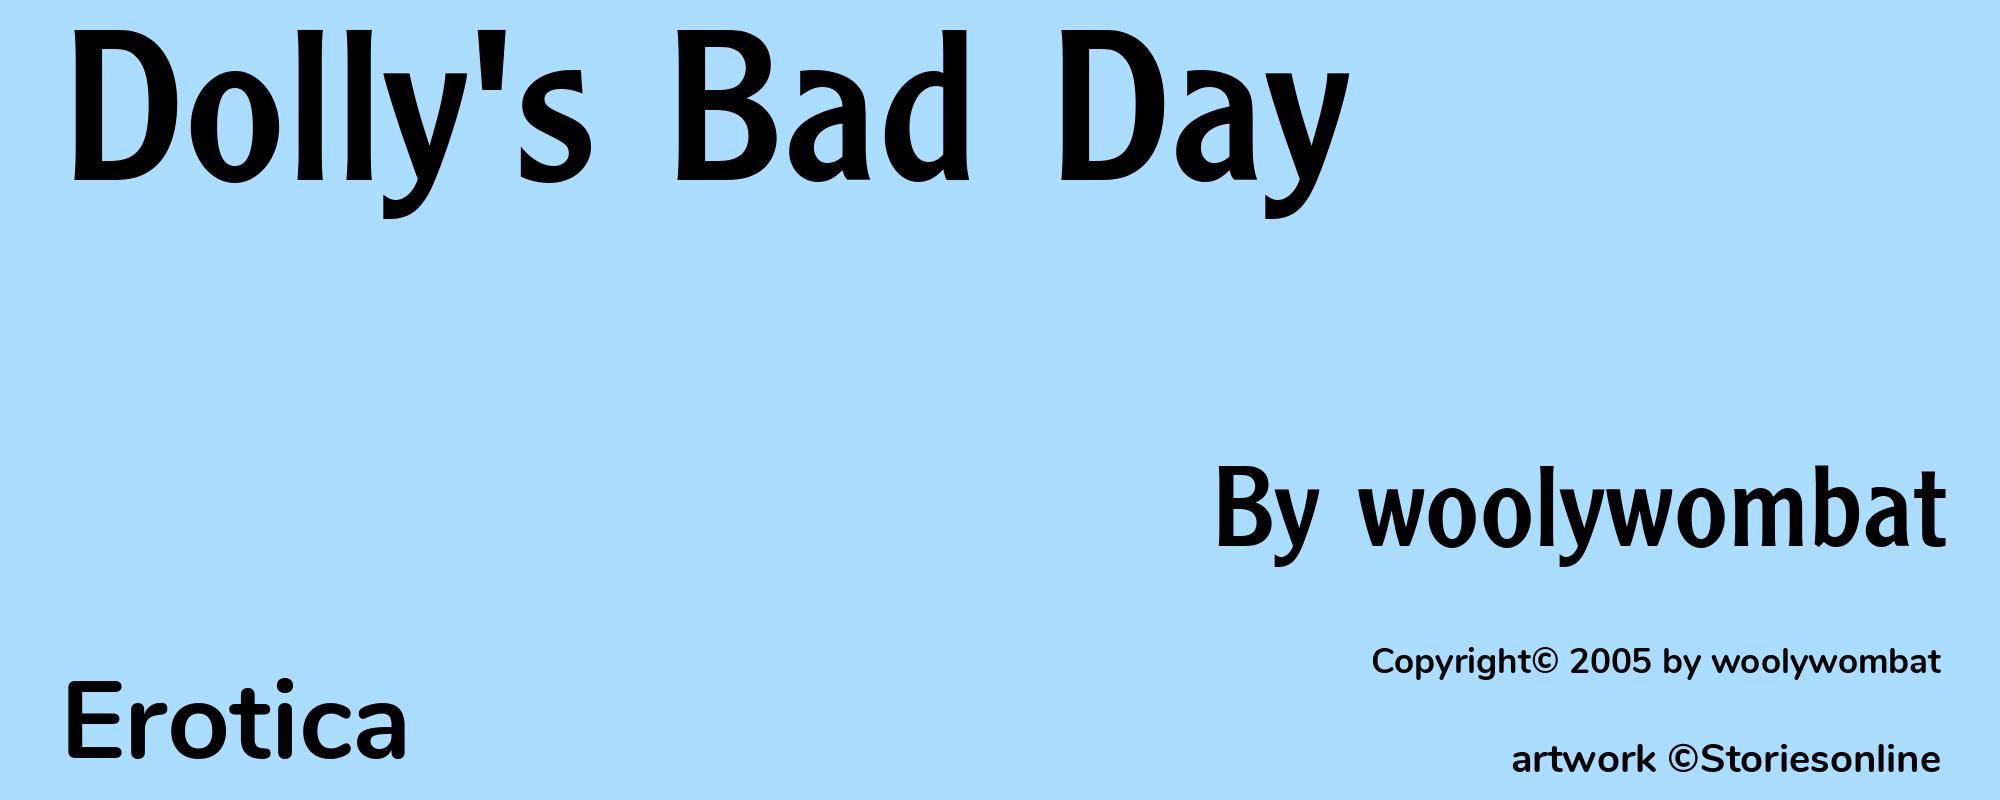 Dolly's Bad Day - Cover